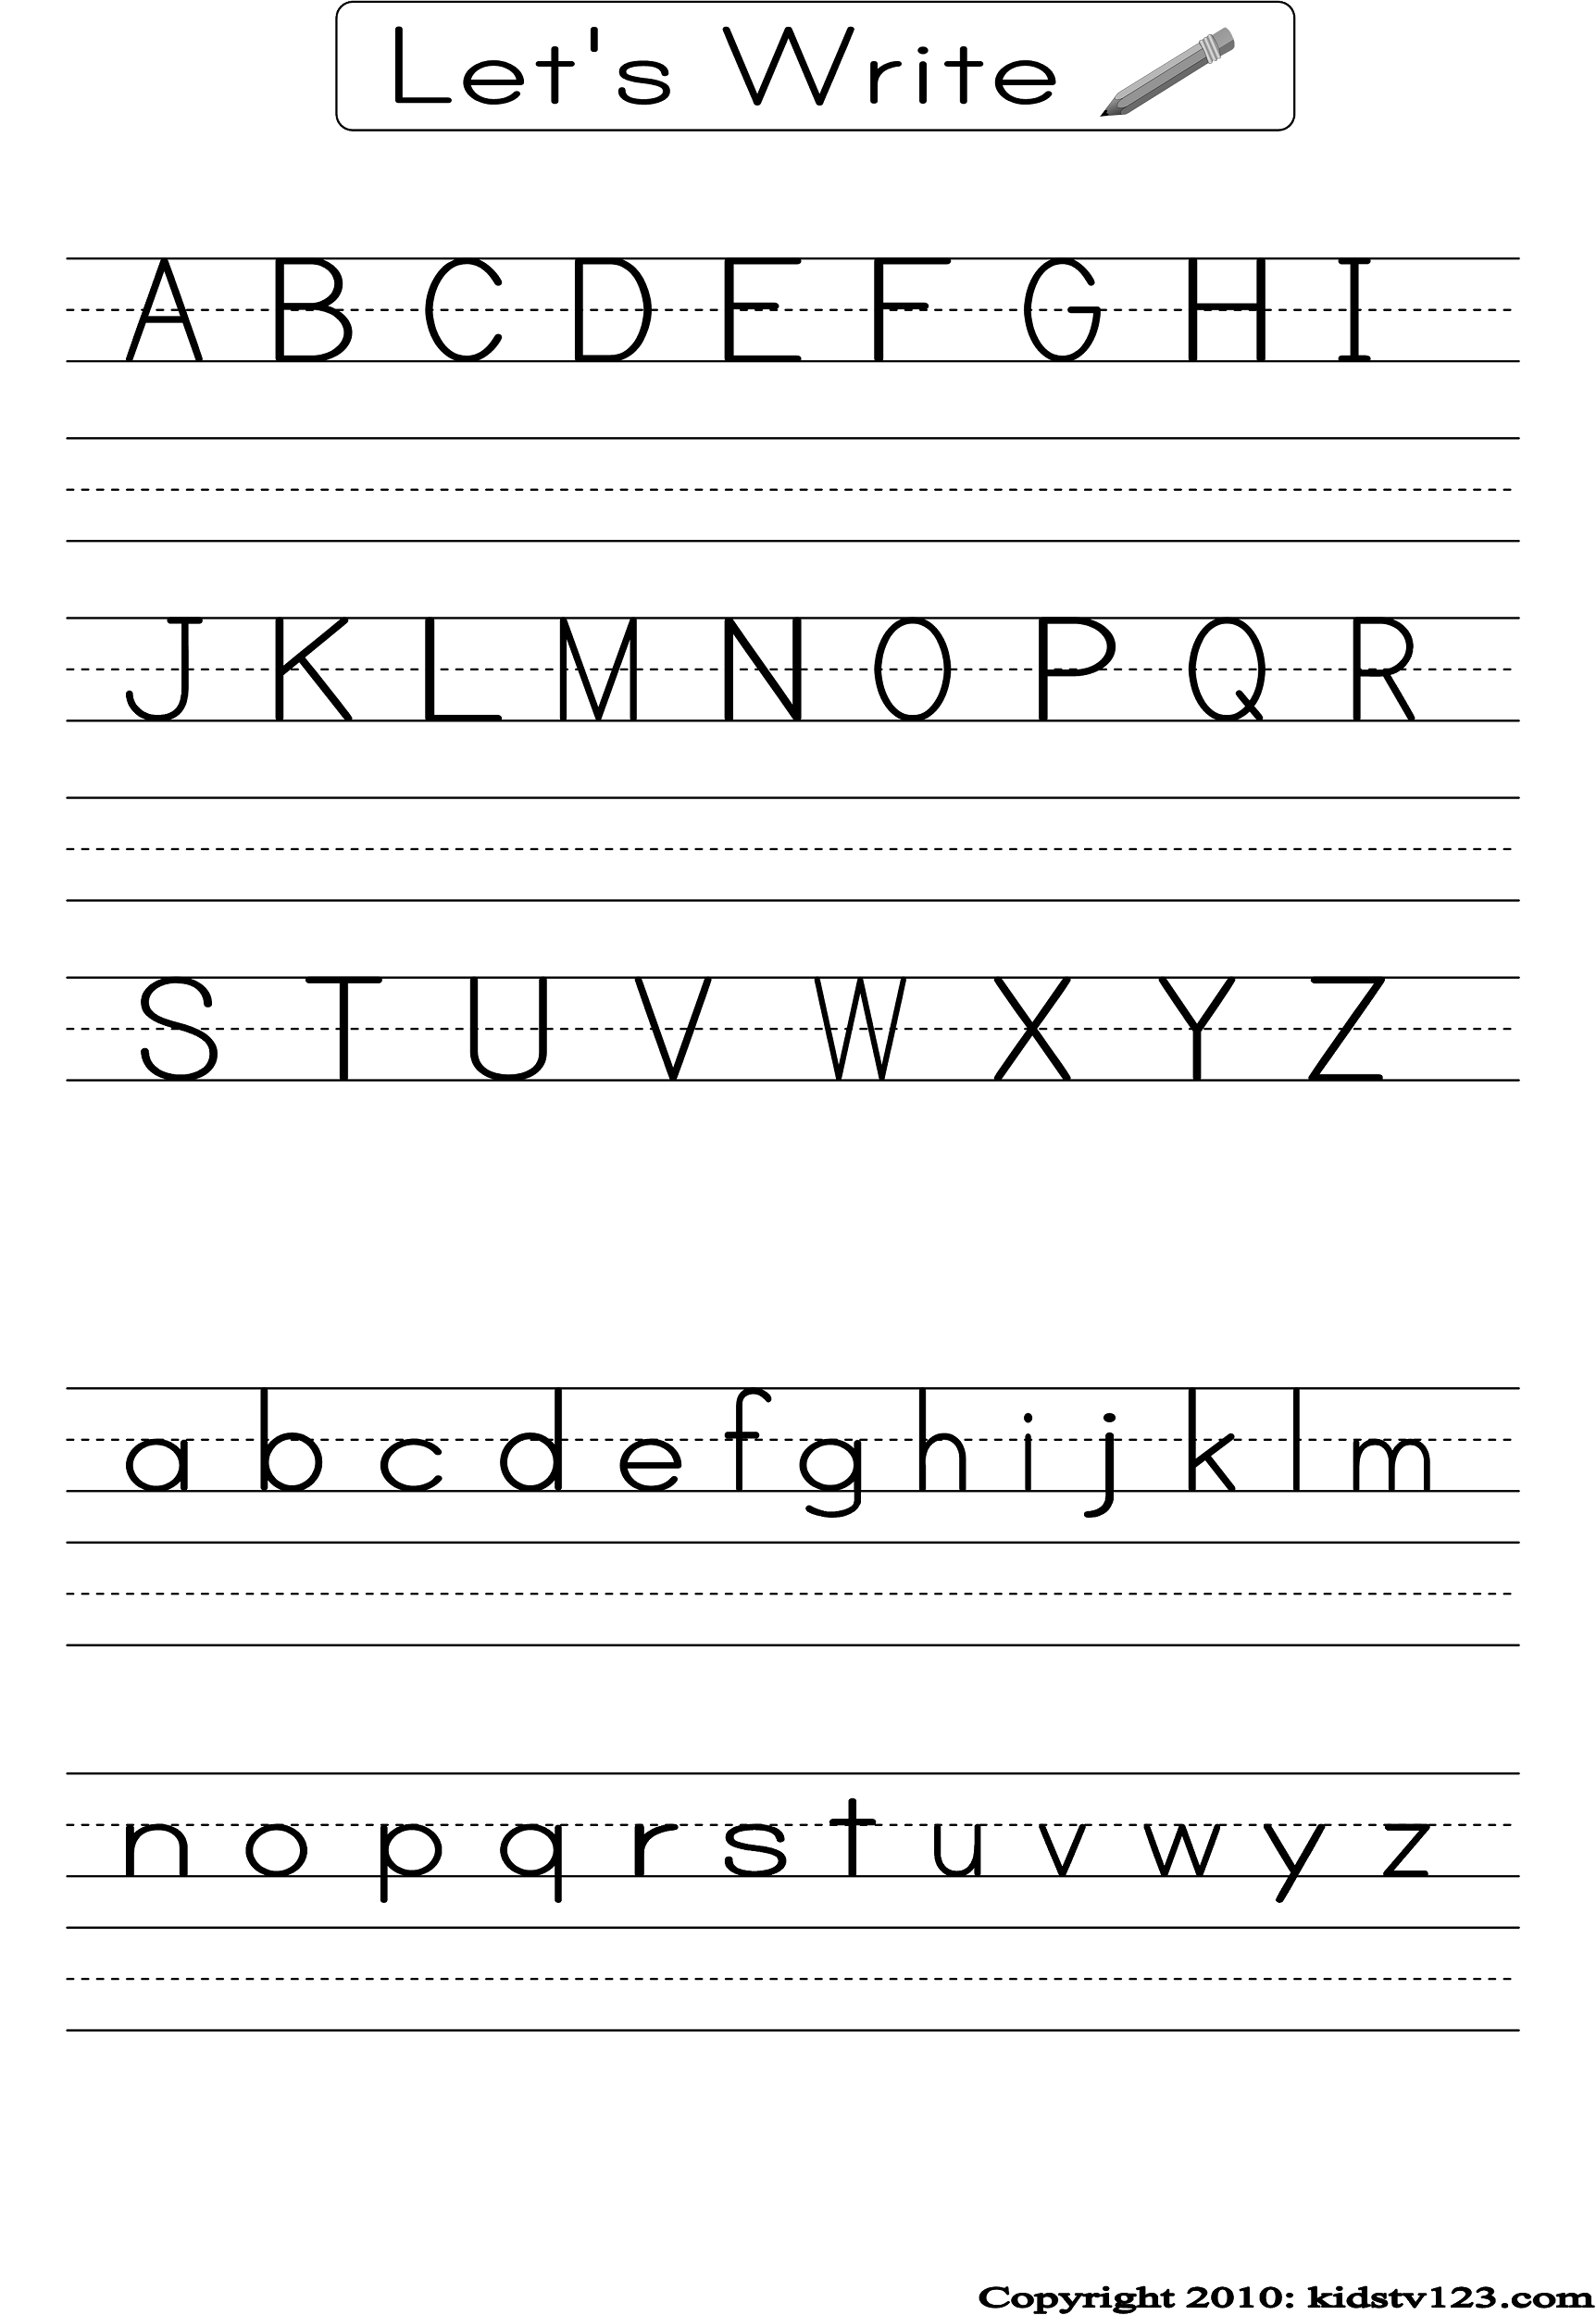 printable-alphabet-worksheets-to-turn-into-a-workbook-fun-with-mama